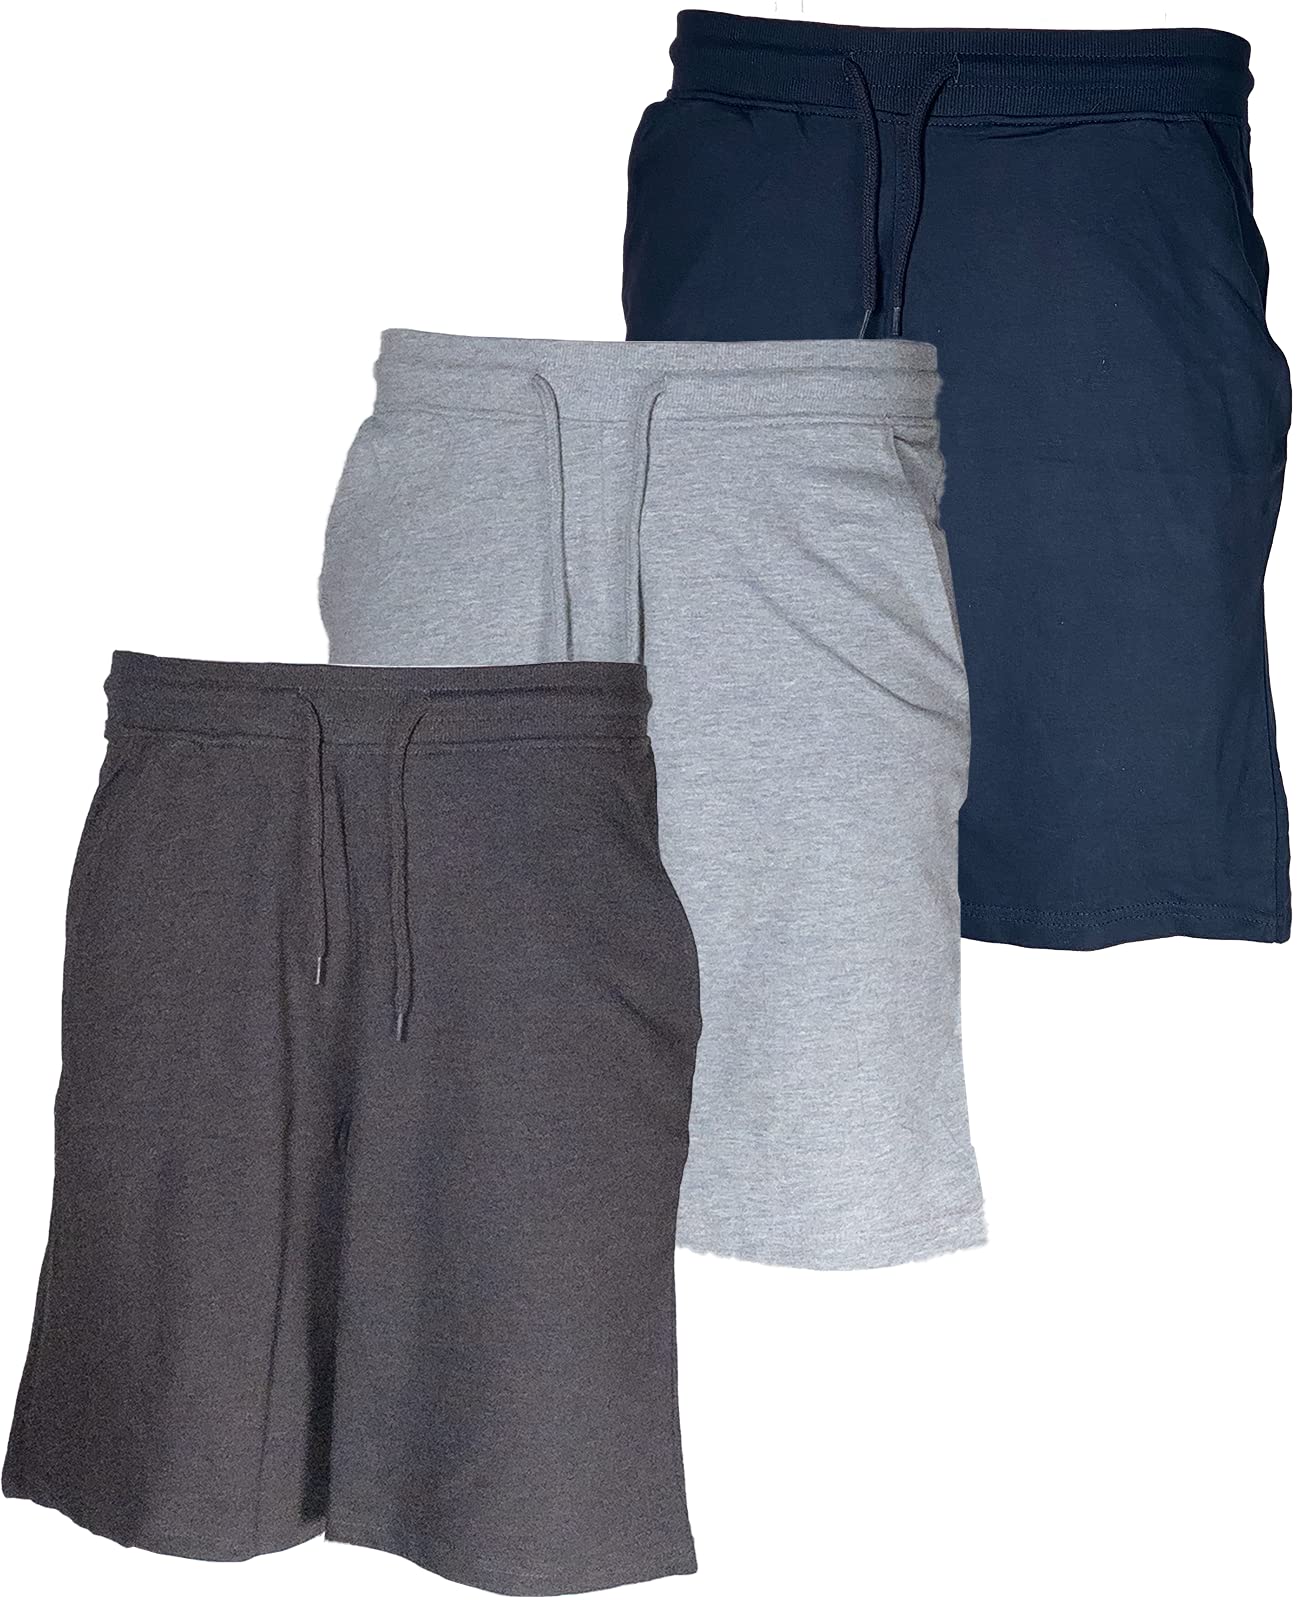 3-Pack Mens French Terry Shorts|Soft Comfortable Cotton|Drawstring Pull|Pockets|Many Colors|Sizes Small-3XL